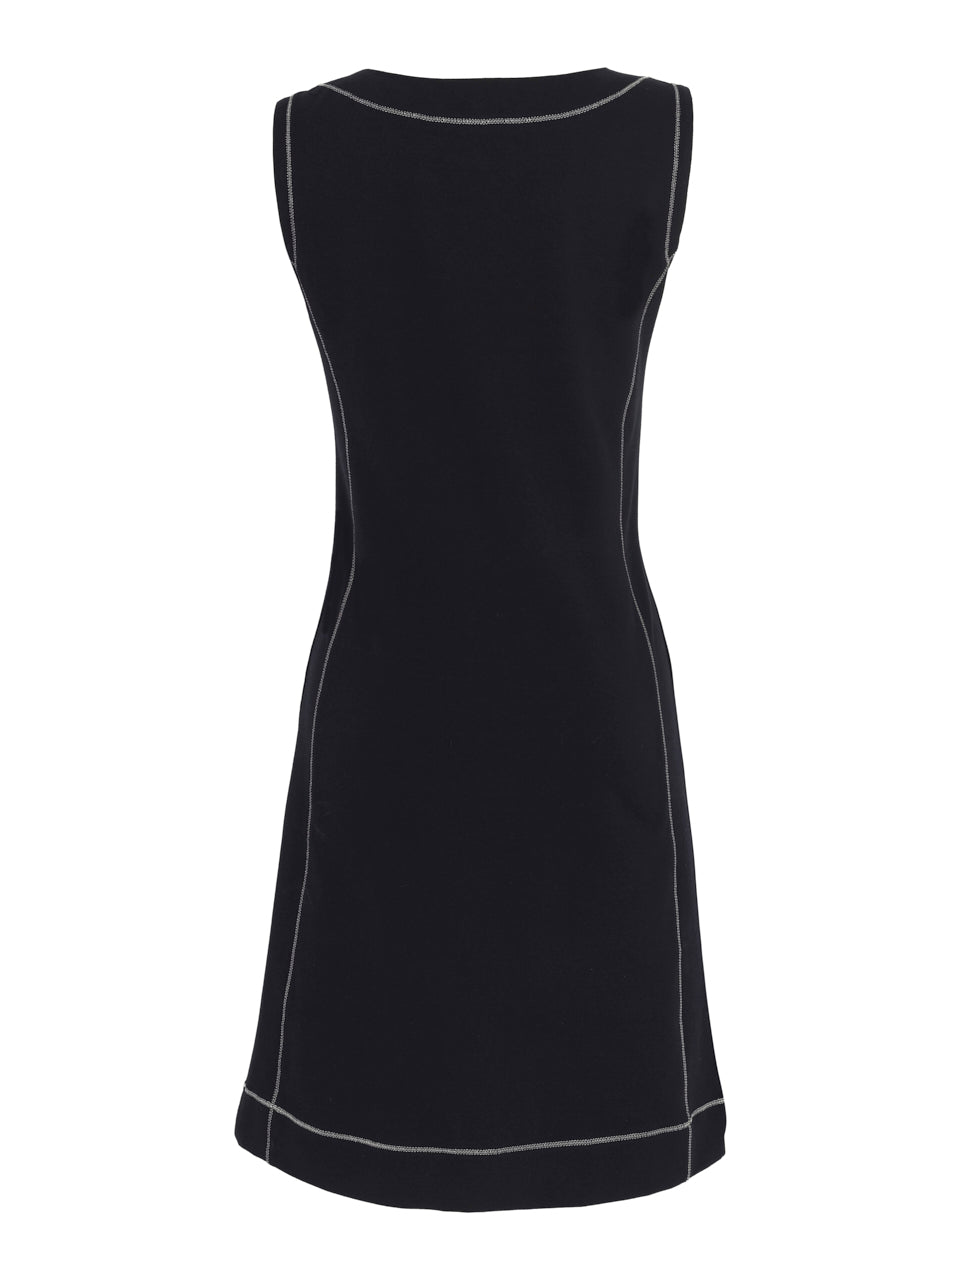 dolcezza diamante front detail in an anchor, sleeveless cotton dress in navy with drawstring roundneck detail and silver stitching (back)